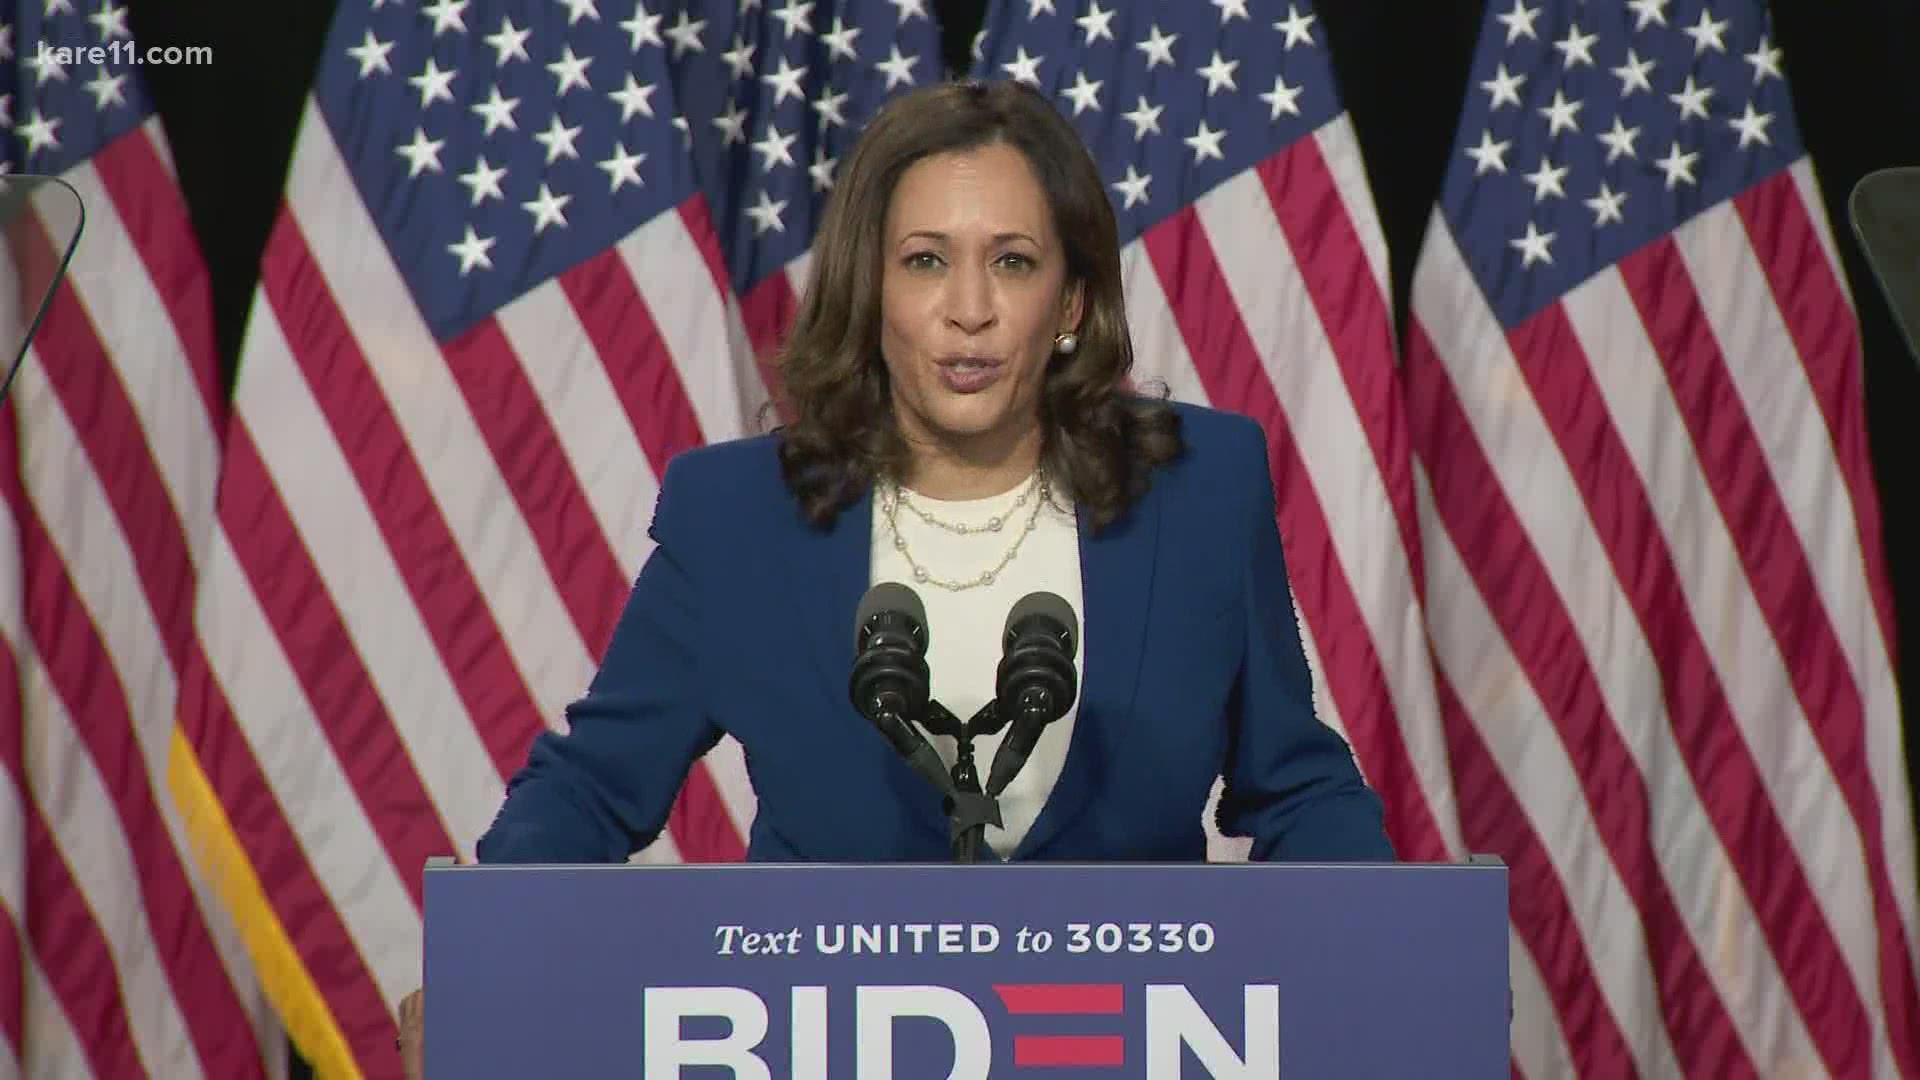 Jana talks with U of M political scientist Kathryn Pearson about the reasoning behind Joe Biden selecting Kamala Harris as his Vice President candidate.